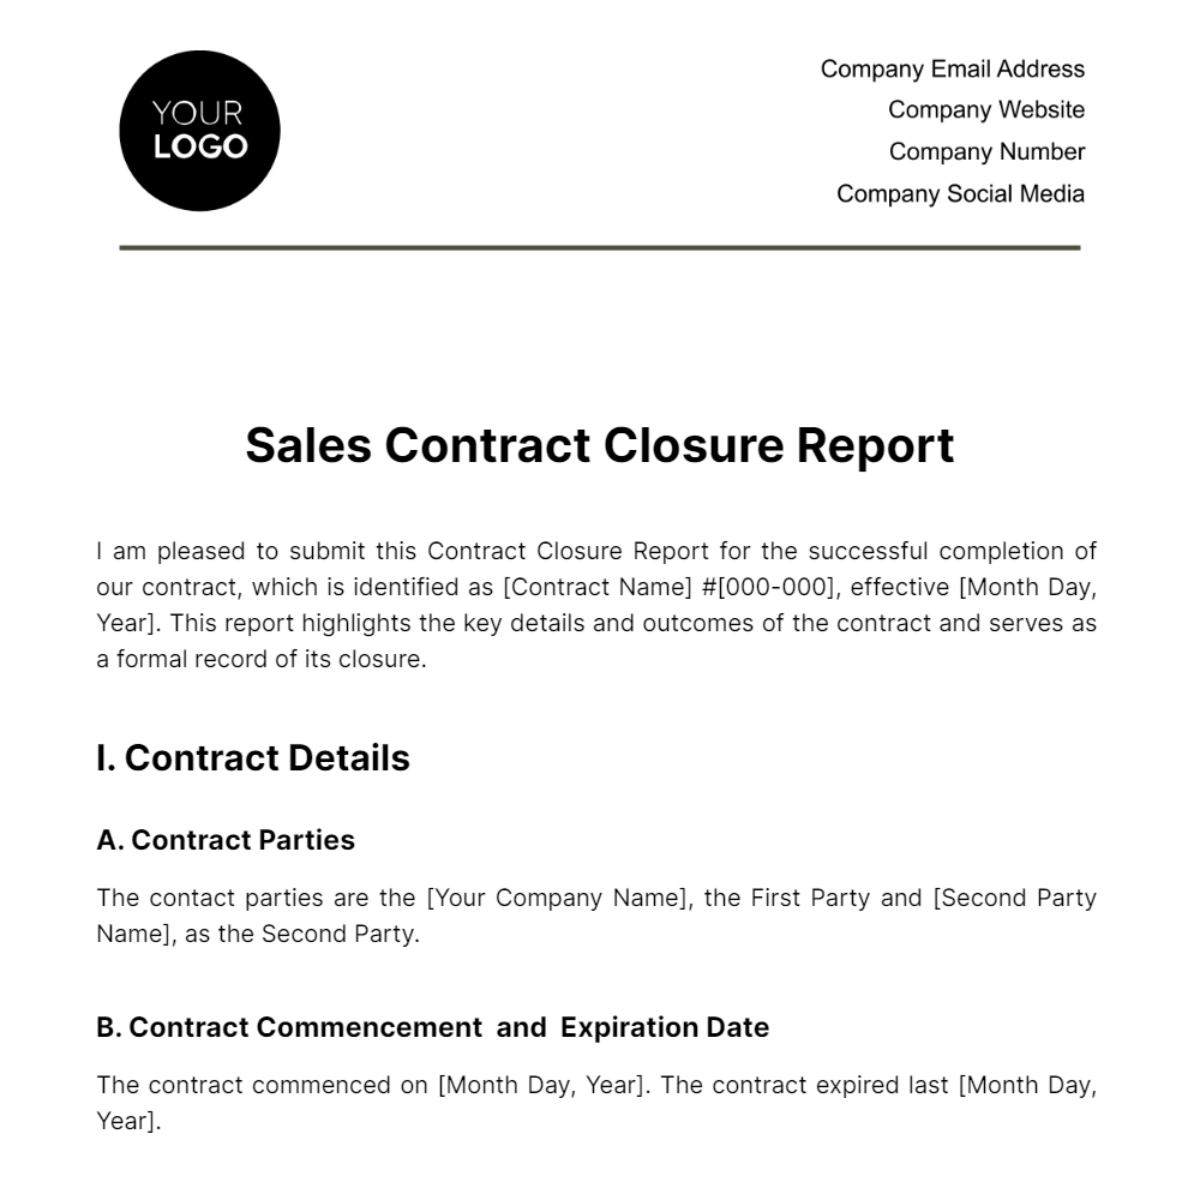 Free Sales Contract Closure Report Template